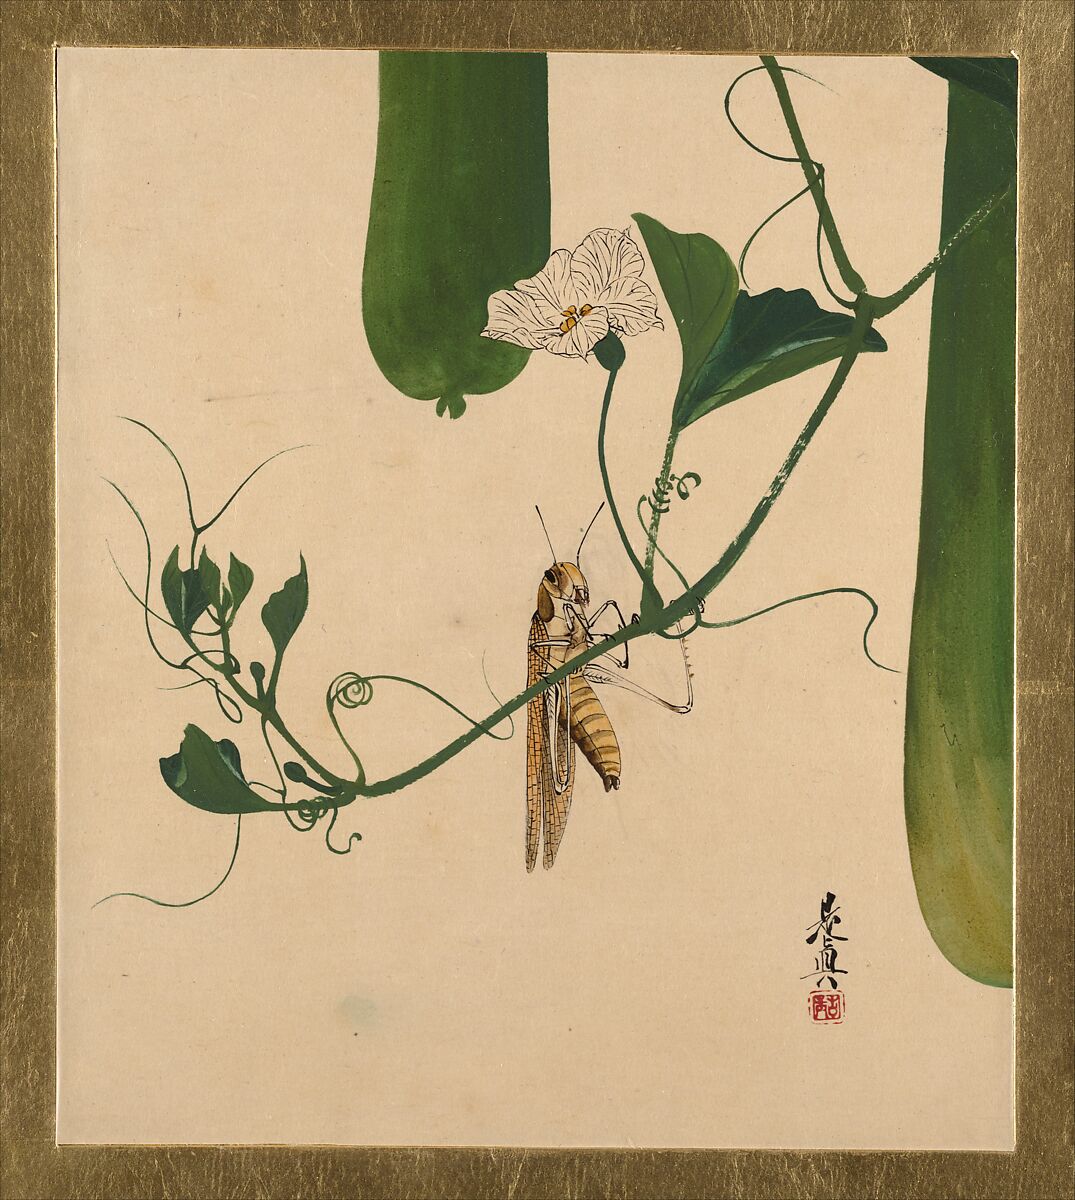 Lacquer Paintings of Various Subjects: Grasshopper on Gourd Vine, Shibata Zeshin (Japanese, 1807–1891), Lacquer on paper, Japan 